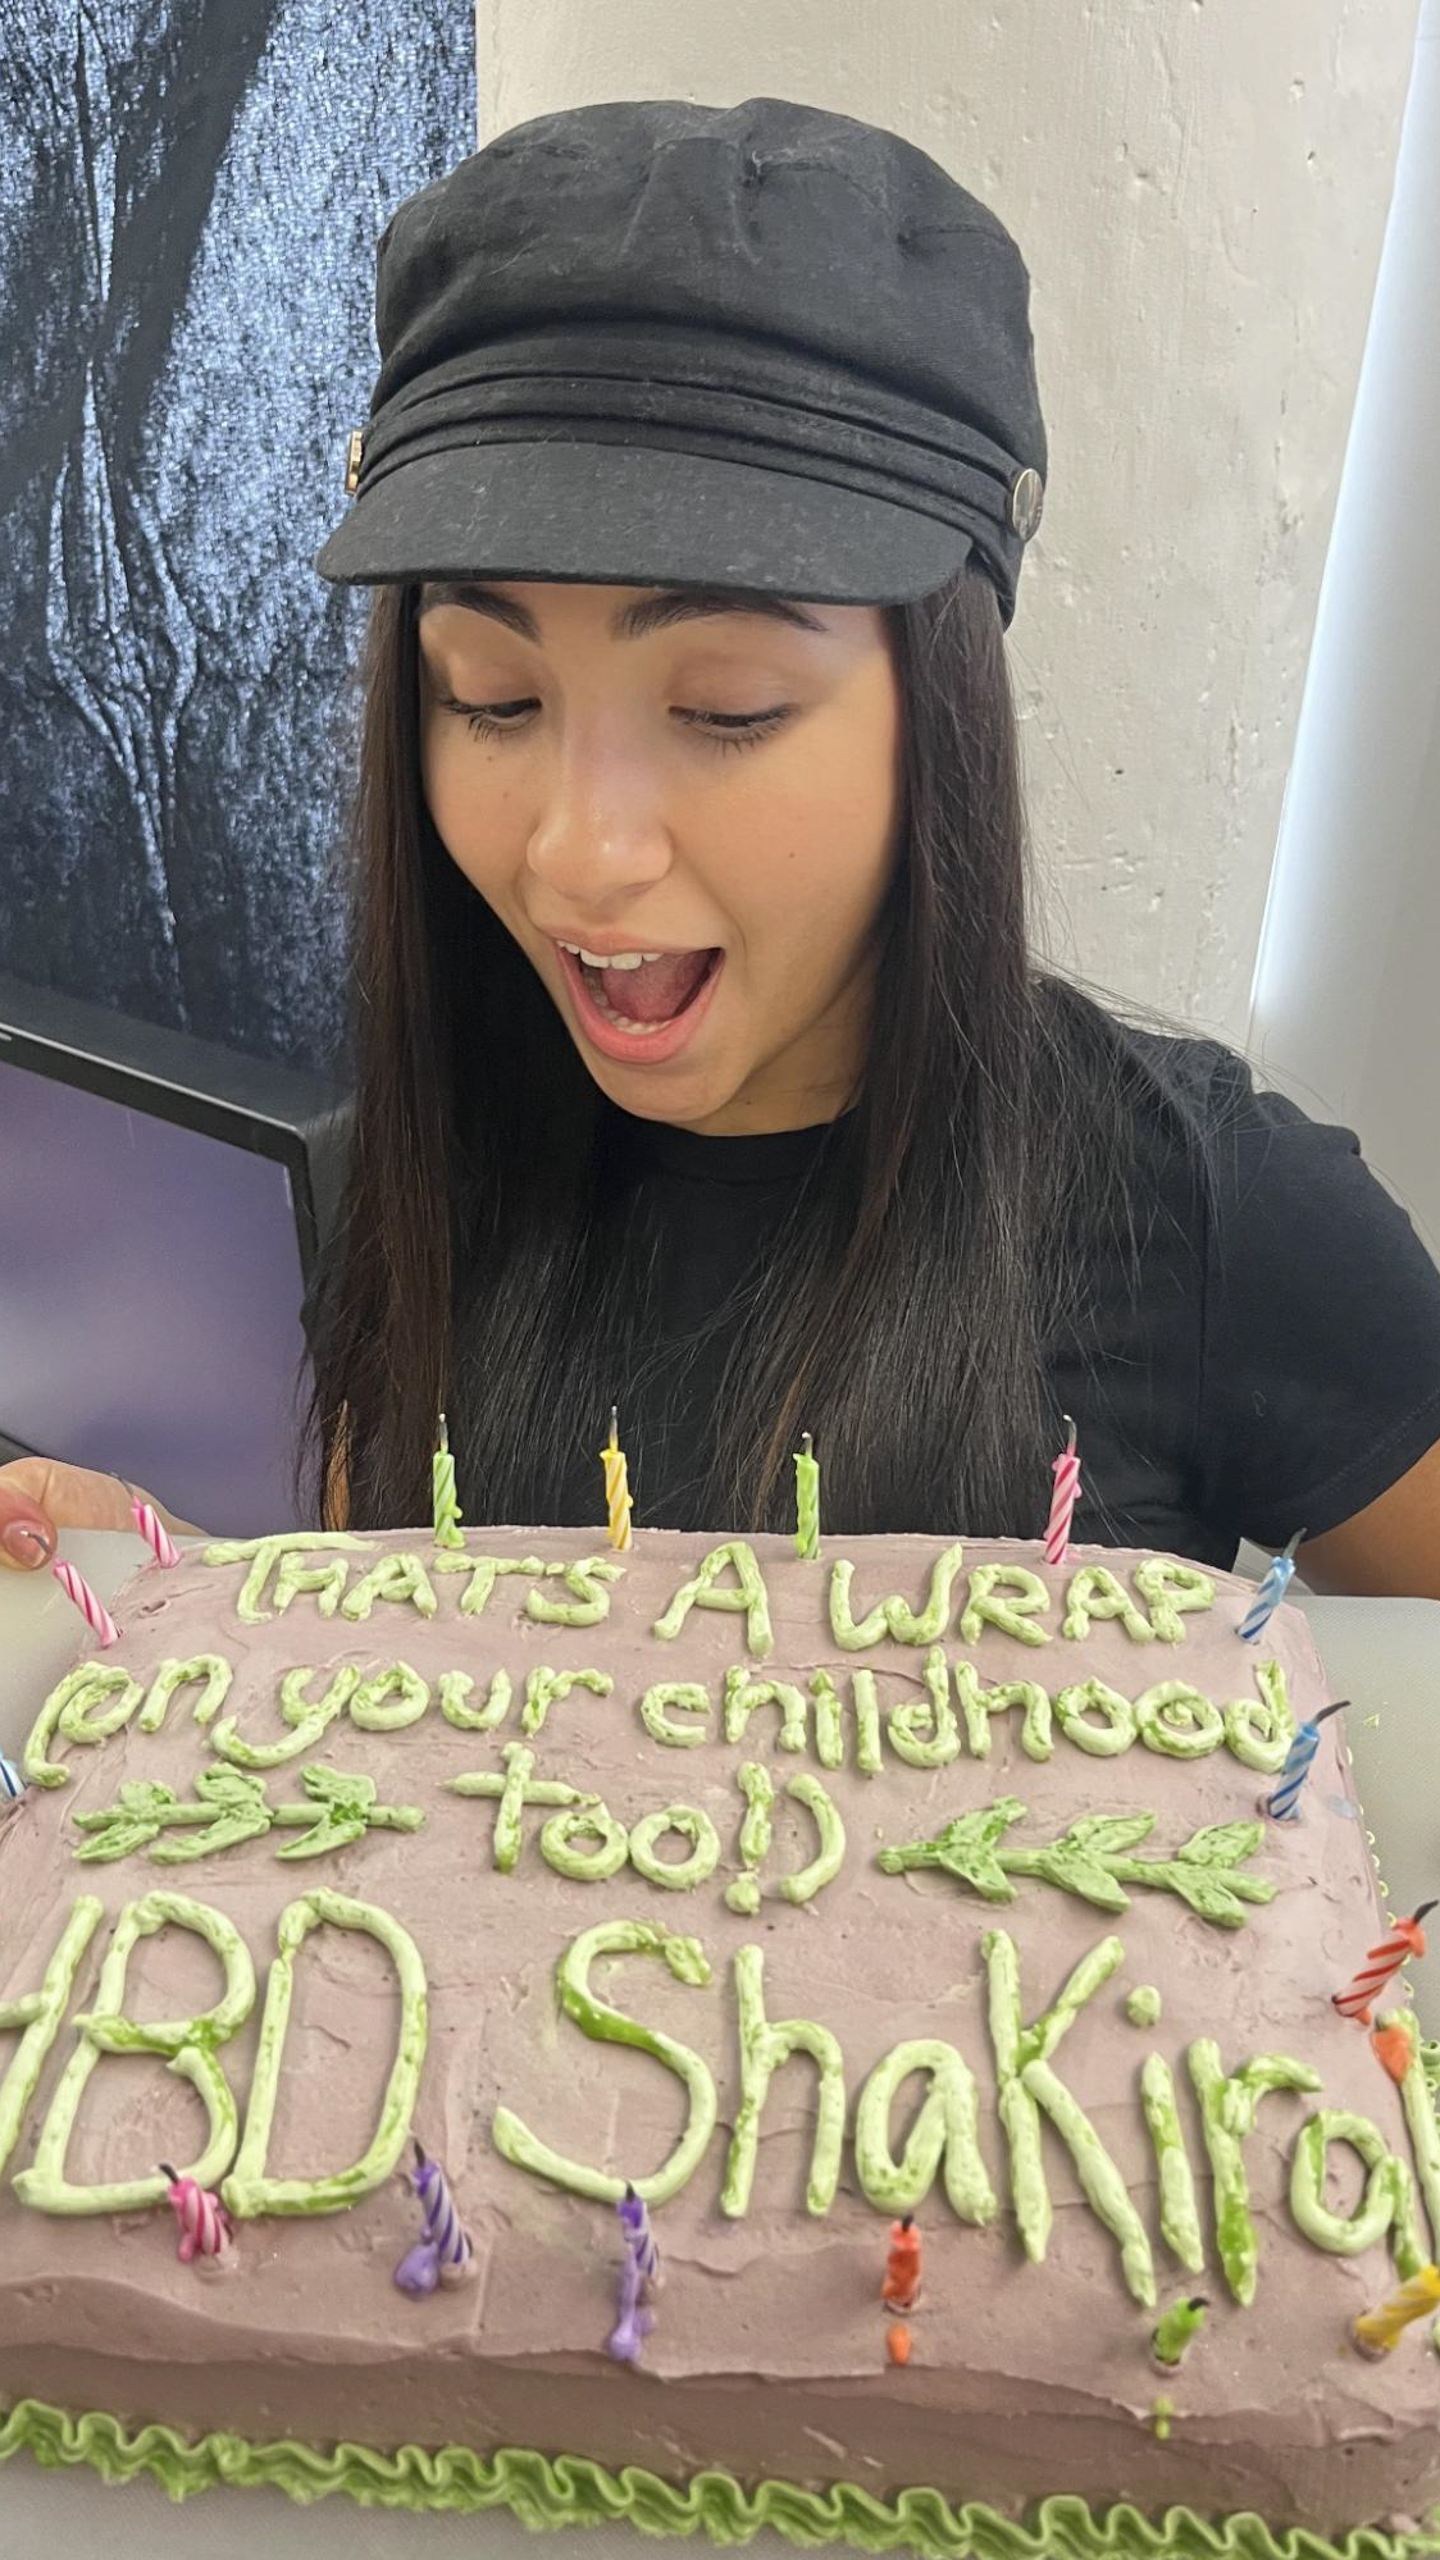 Person looking shocked and happy about a birthday cake